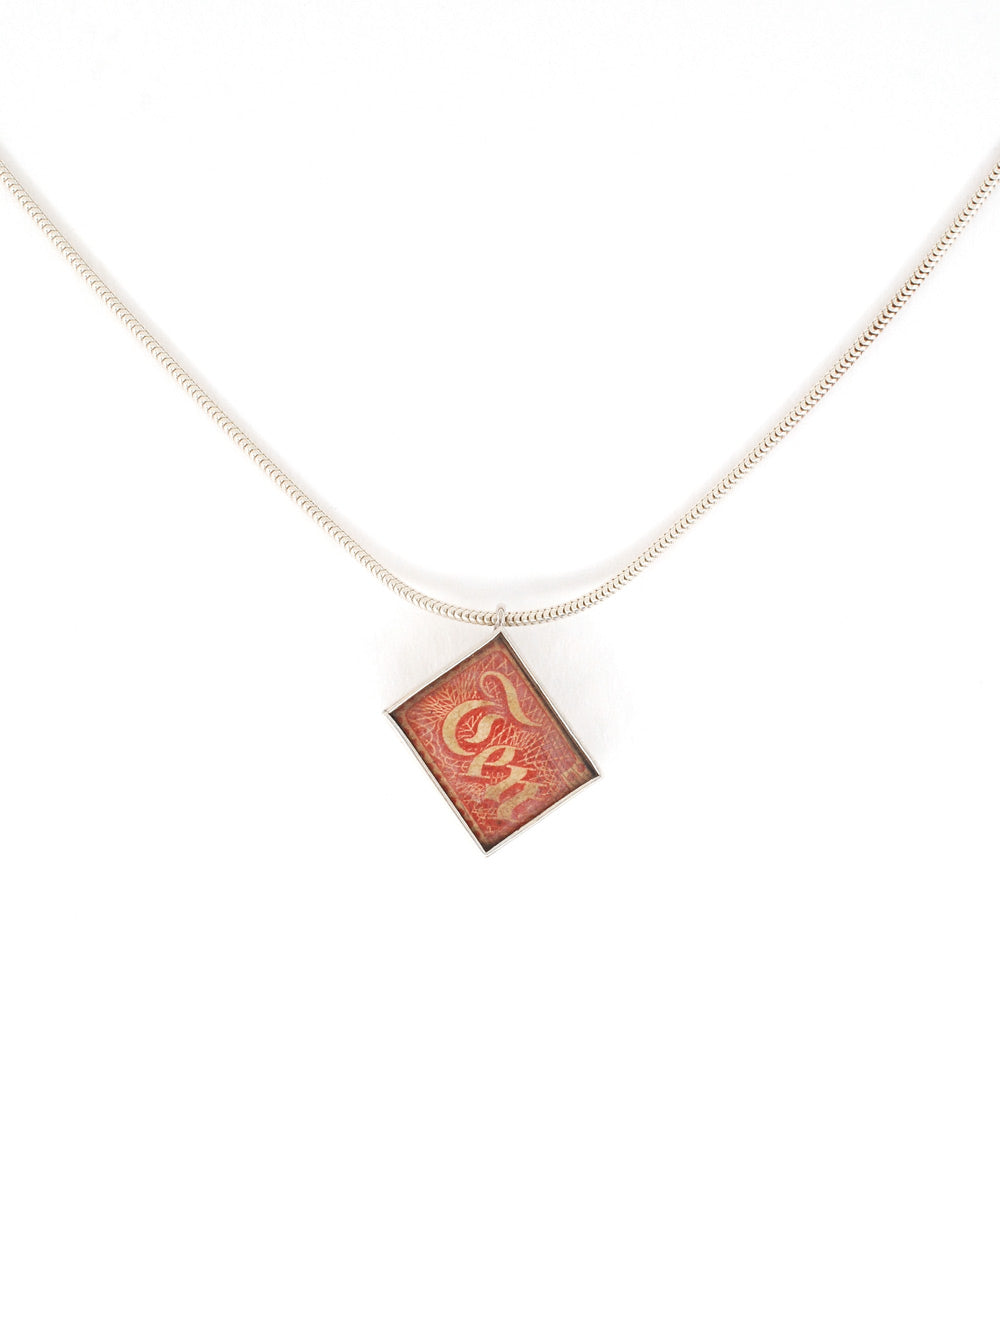 EMERGENCY TENNER CHARM NECKLACE